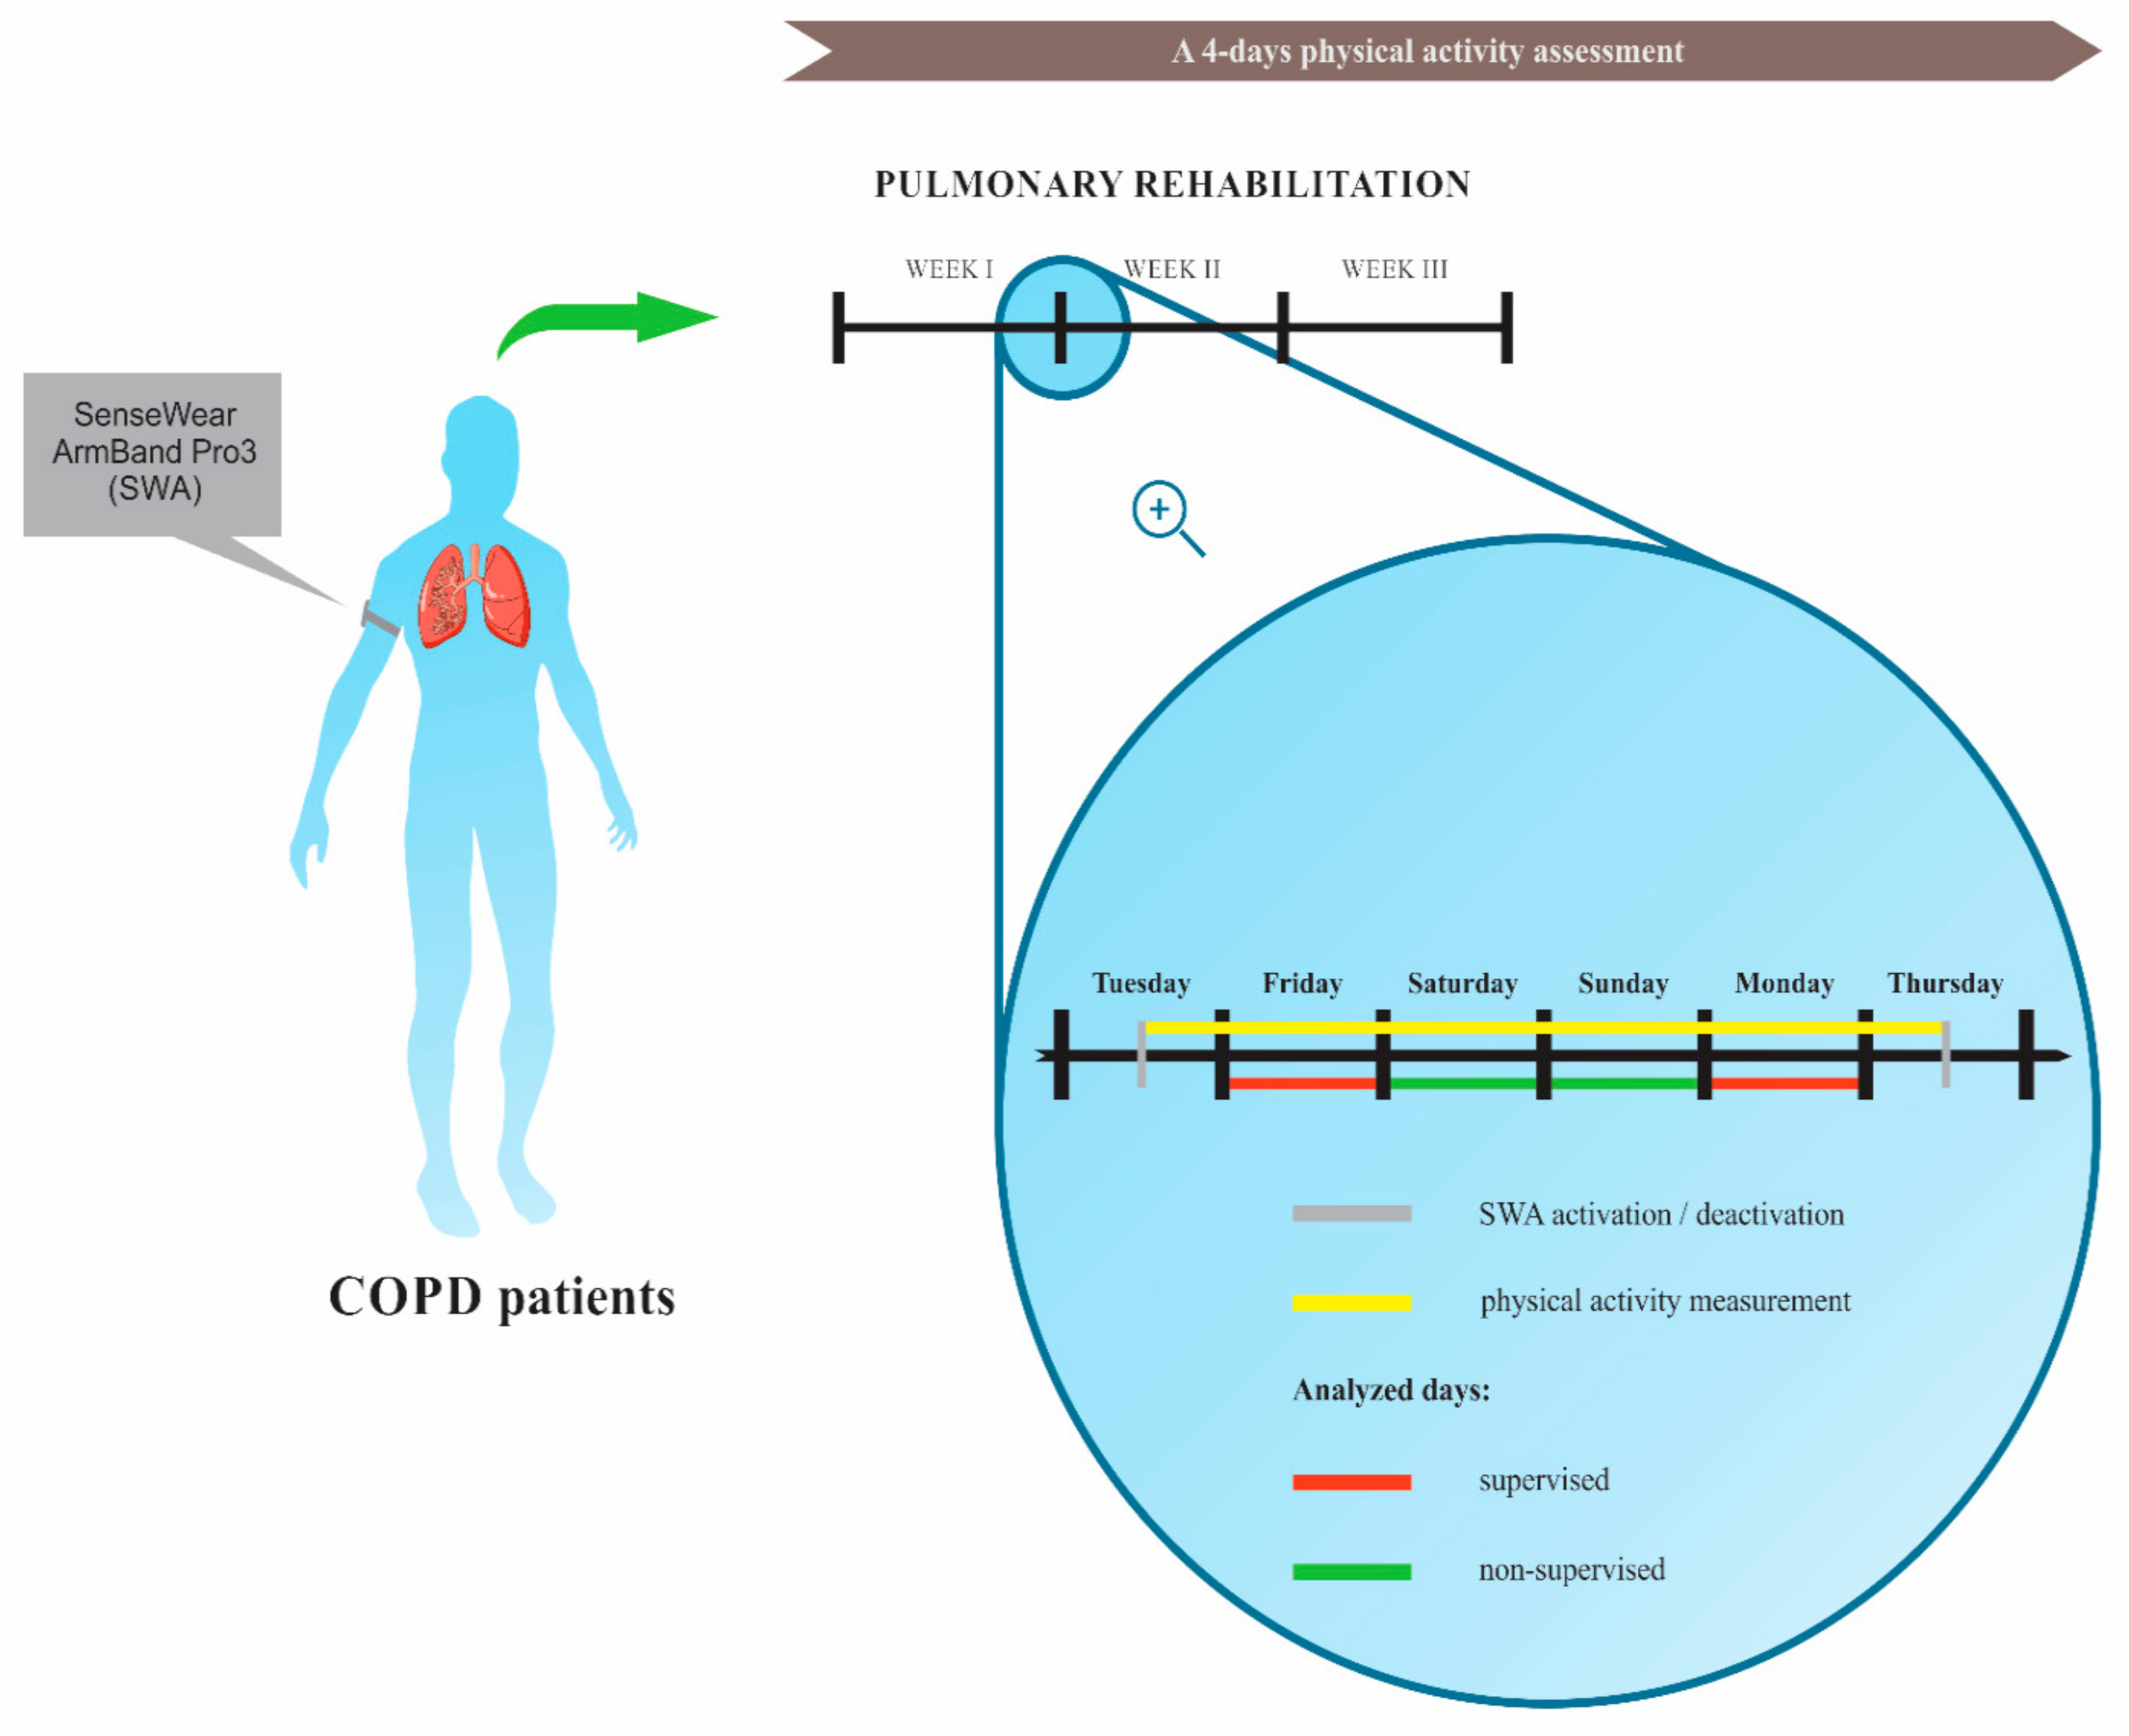 Sensors | Free Full-Text | Monitoring Physical Activity with a Wearable  Sensor in Patients with COPD during In-Hospital Pulmonary Rehabilitation  Program: A Pilot Study | HTML